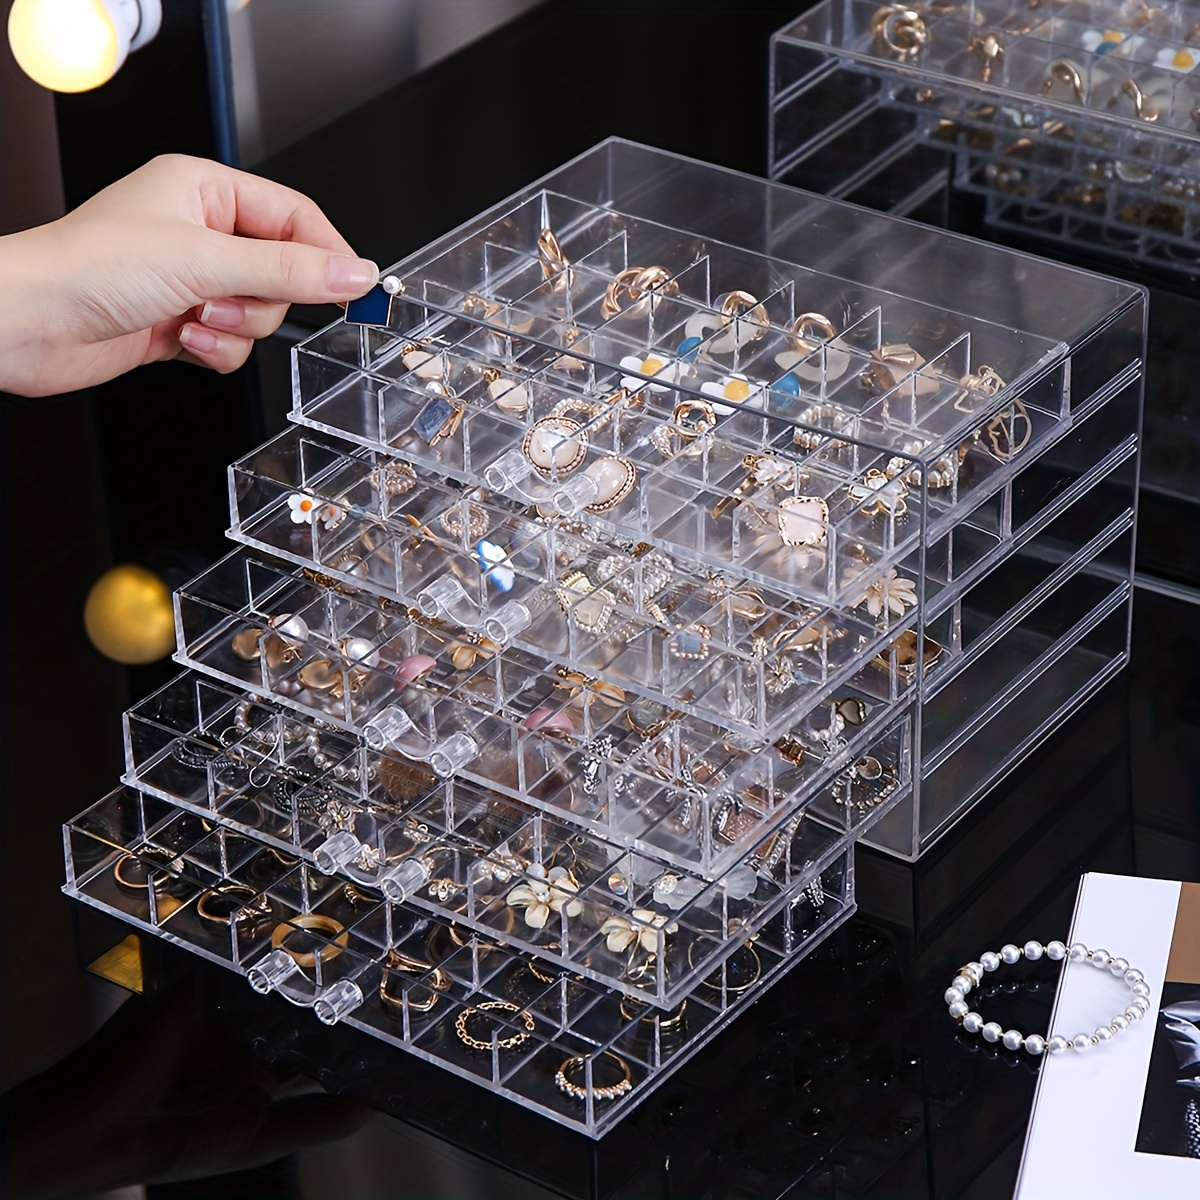 

1pc Large Capacity Transparent Jewelry Organizer - 5-layer, 120 Compartments For Earrings, Rings, Necklaces & Bracelets | Drawer-style 3-layer, 72 Grids For Nail Art & Accessories Storage